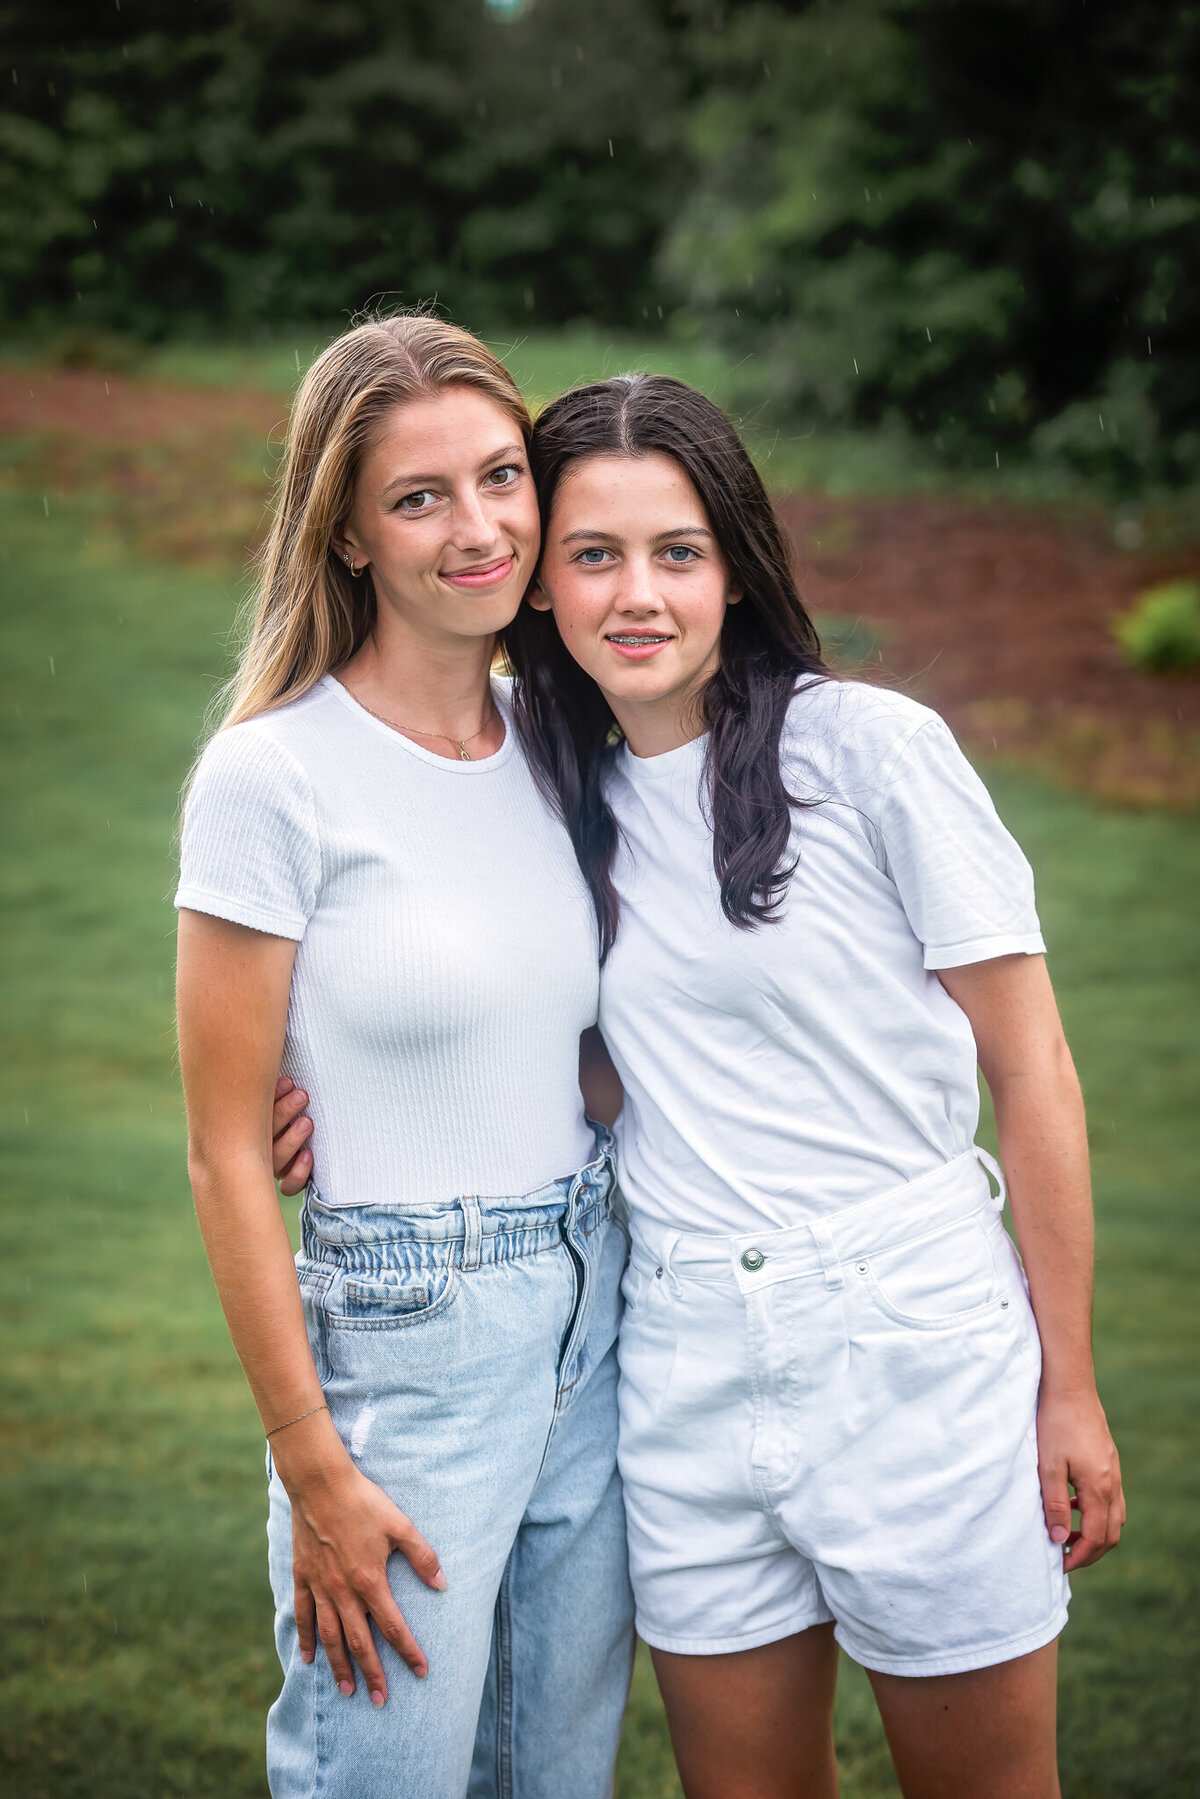 Two young sisters dressed in white shirts are standing beside each other and smiling.